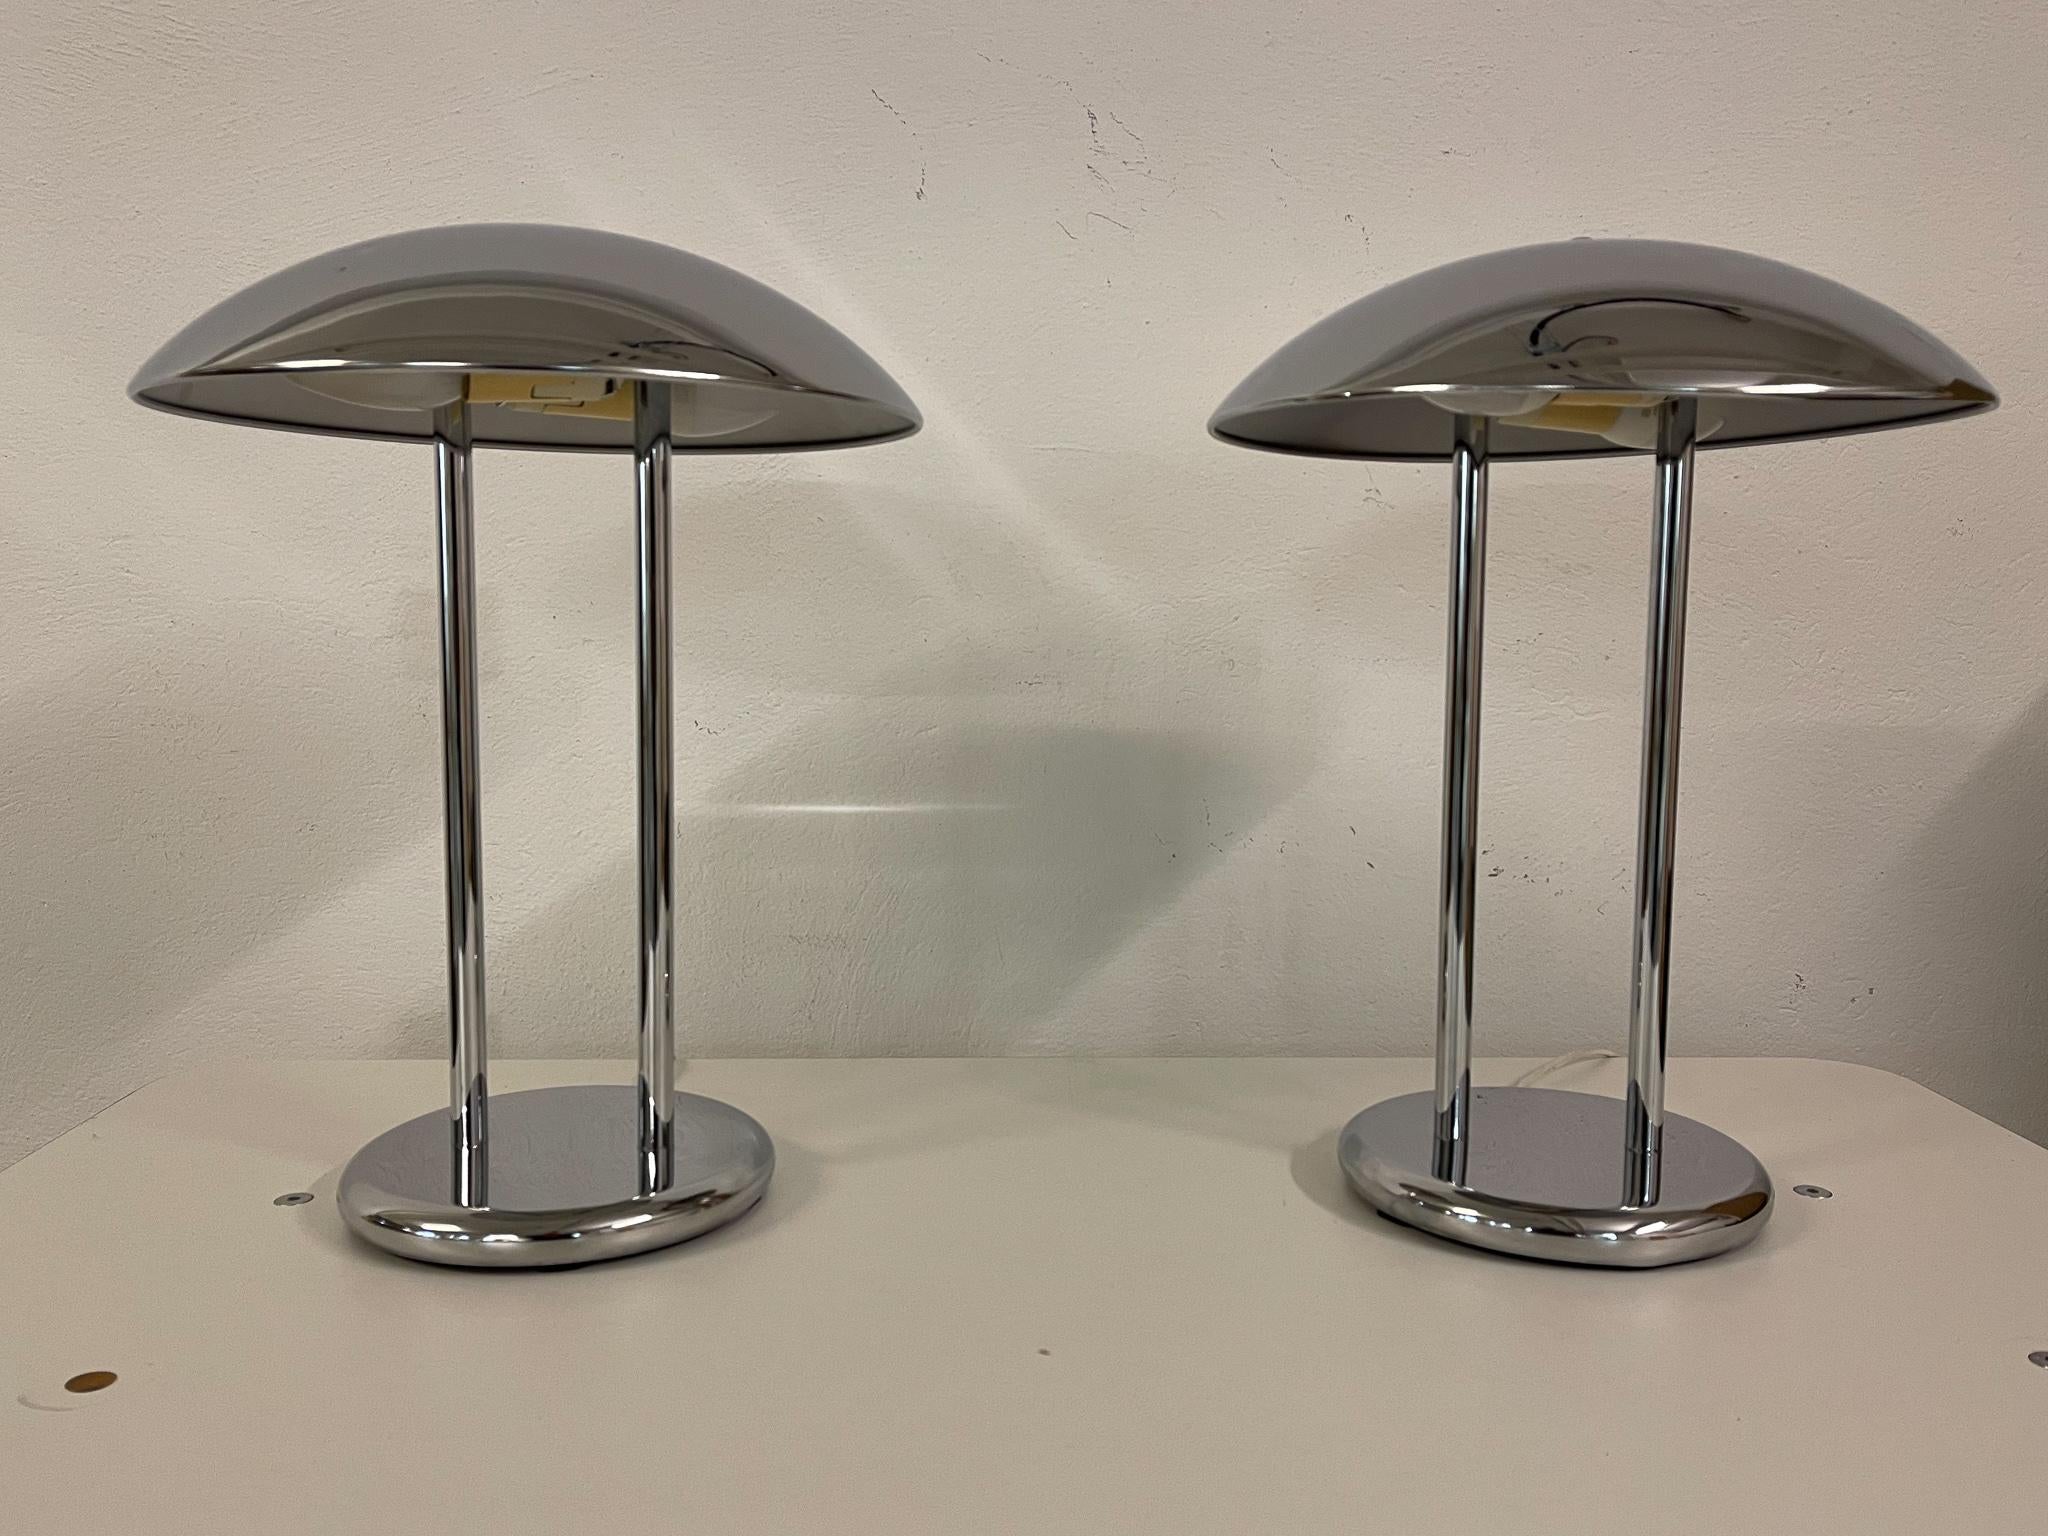 Space Age Scandinavian Space Ace Style Pair of Table Lamps Ikea, Sweden, 1980s